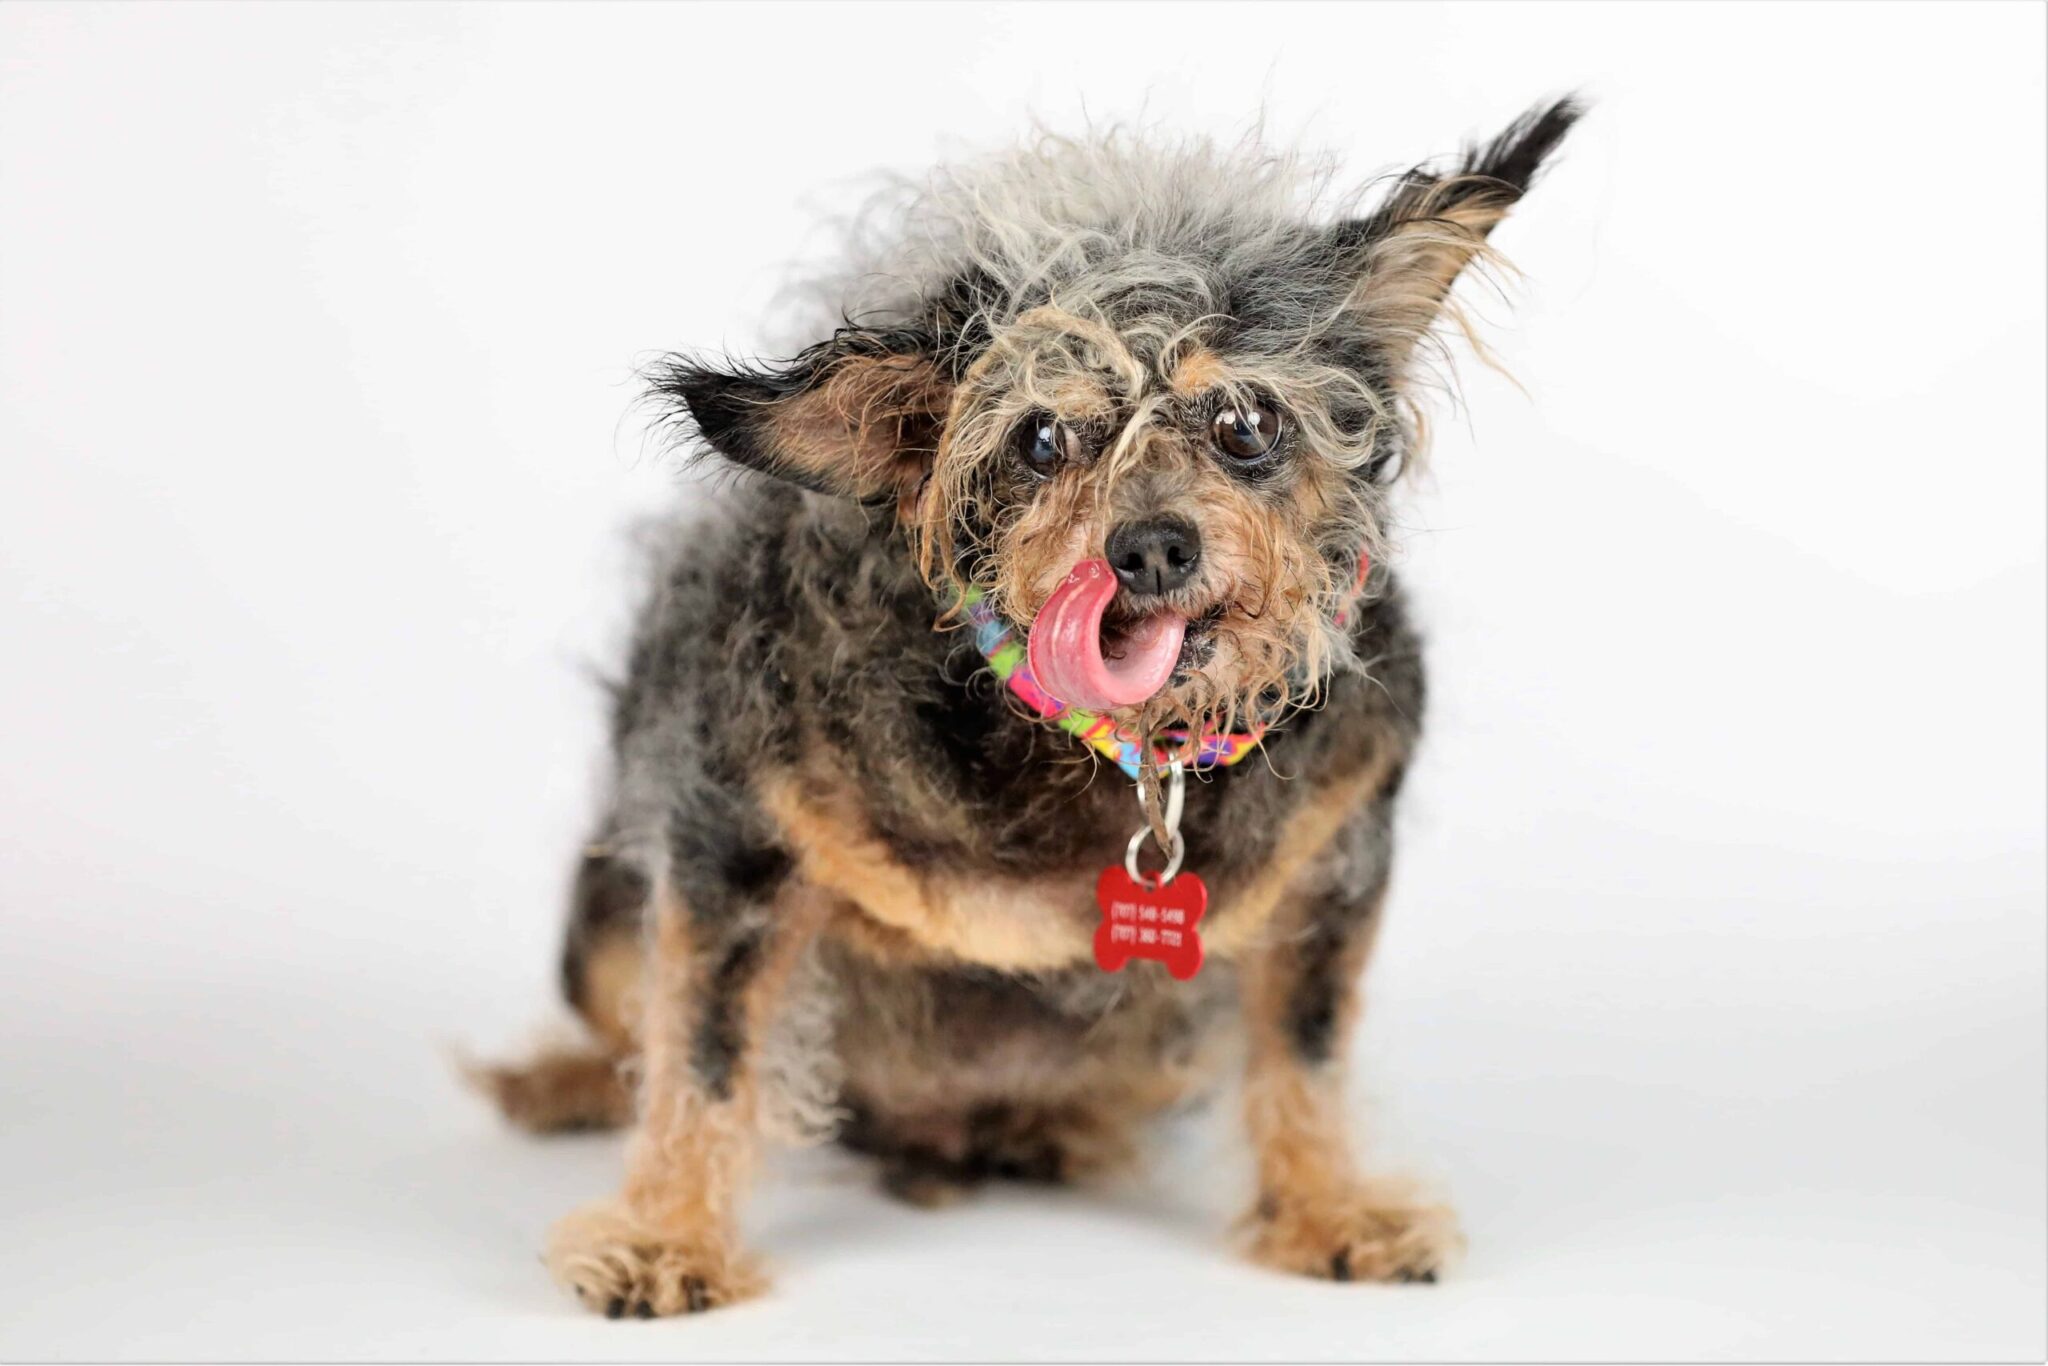 Scamp the Tramp was crowned The World’s Ugliest Dog at the Sonoma-Marin Fai...